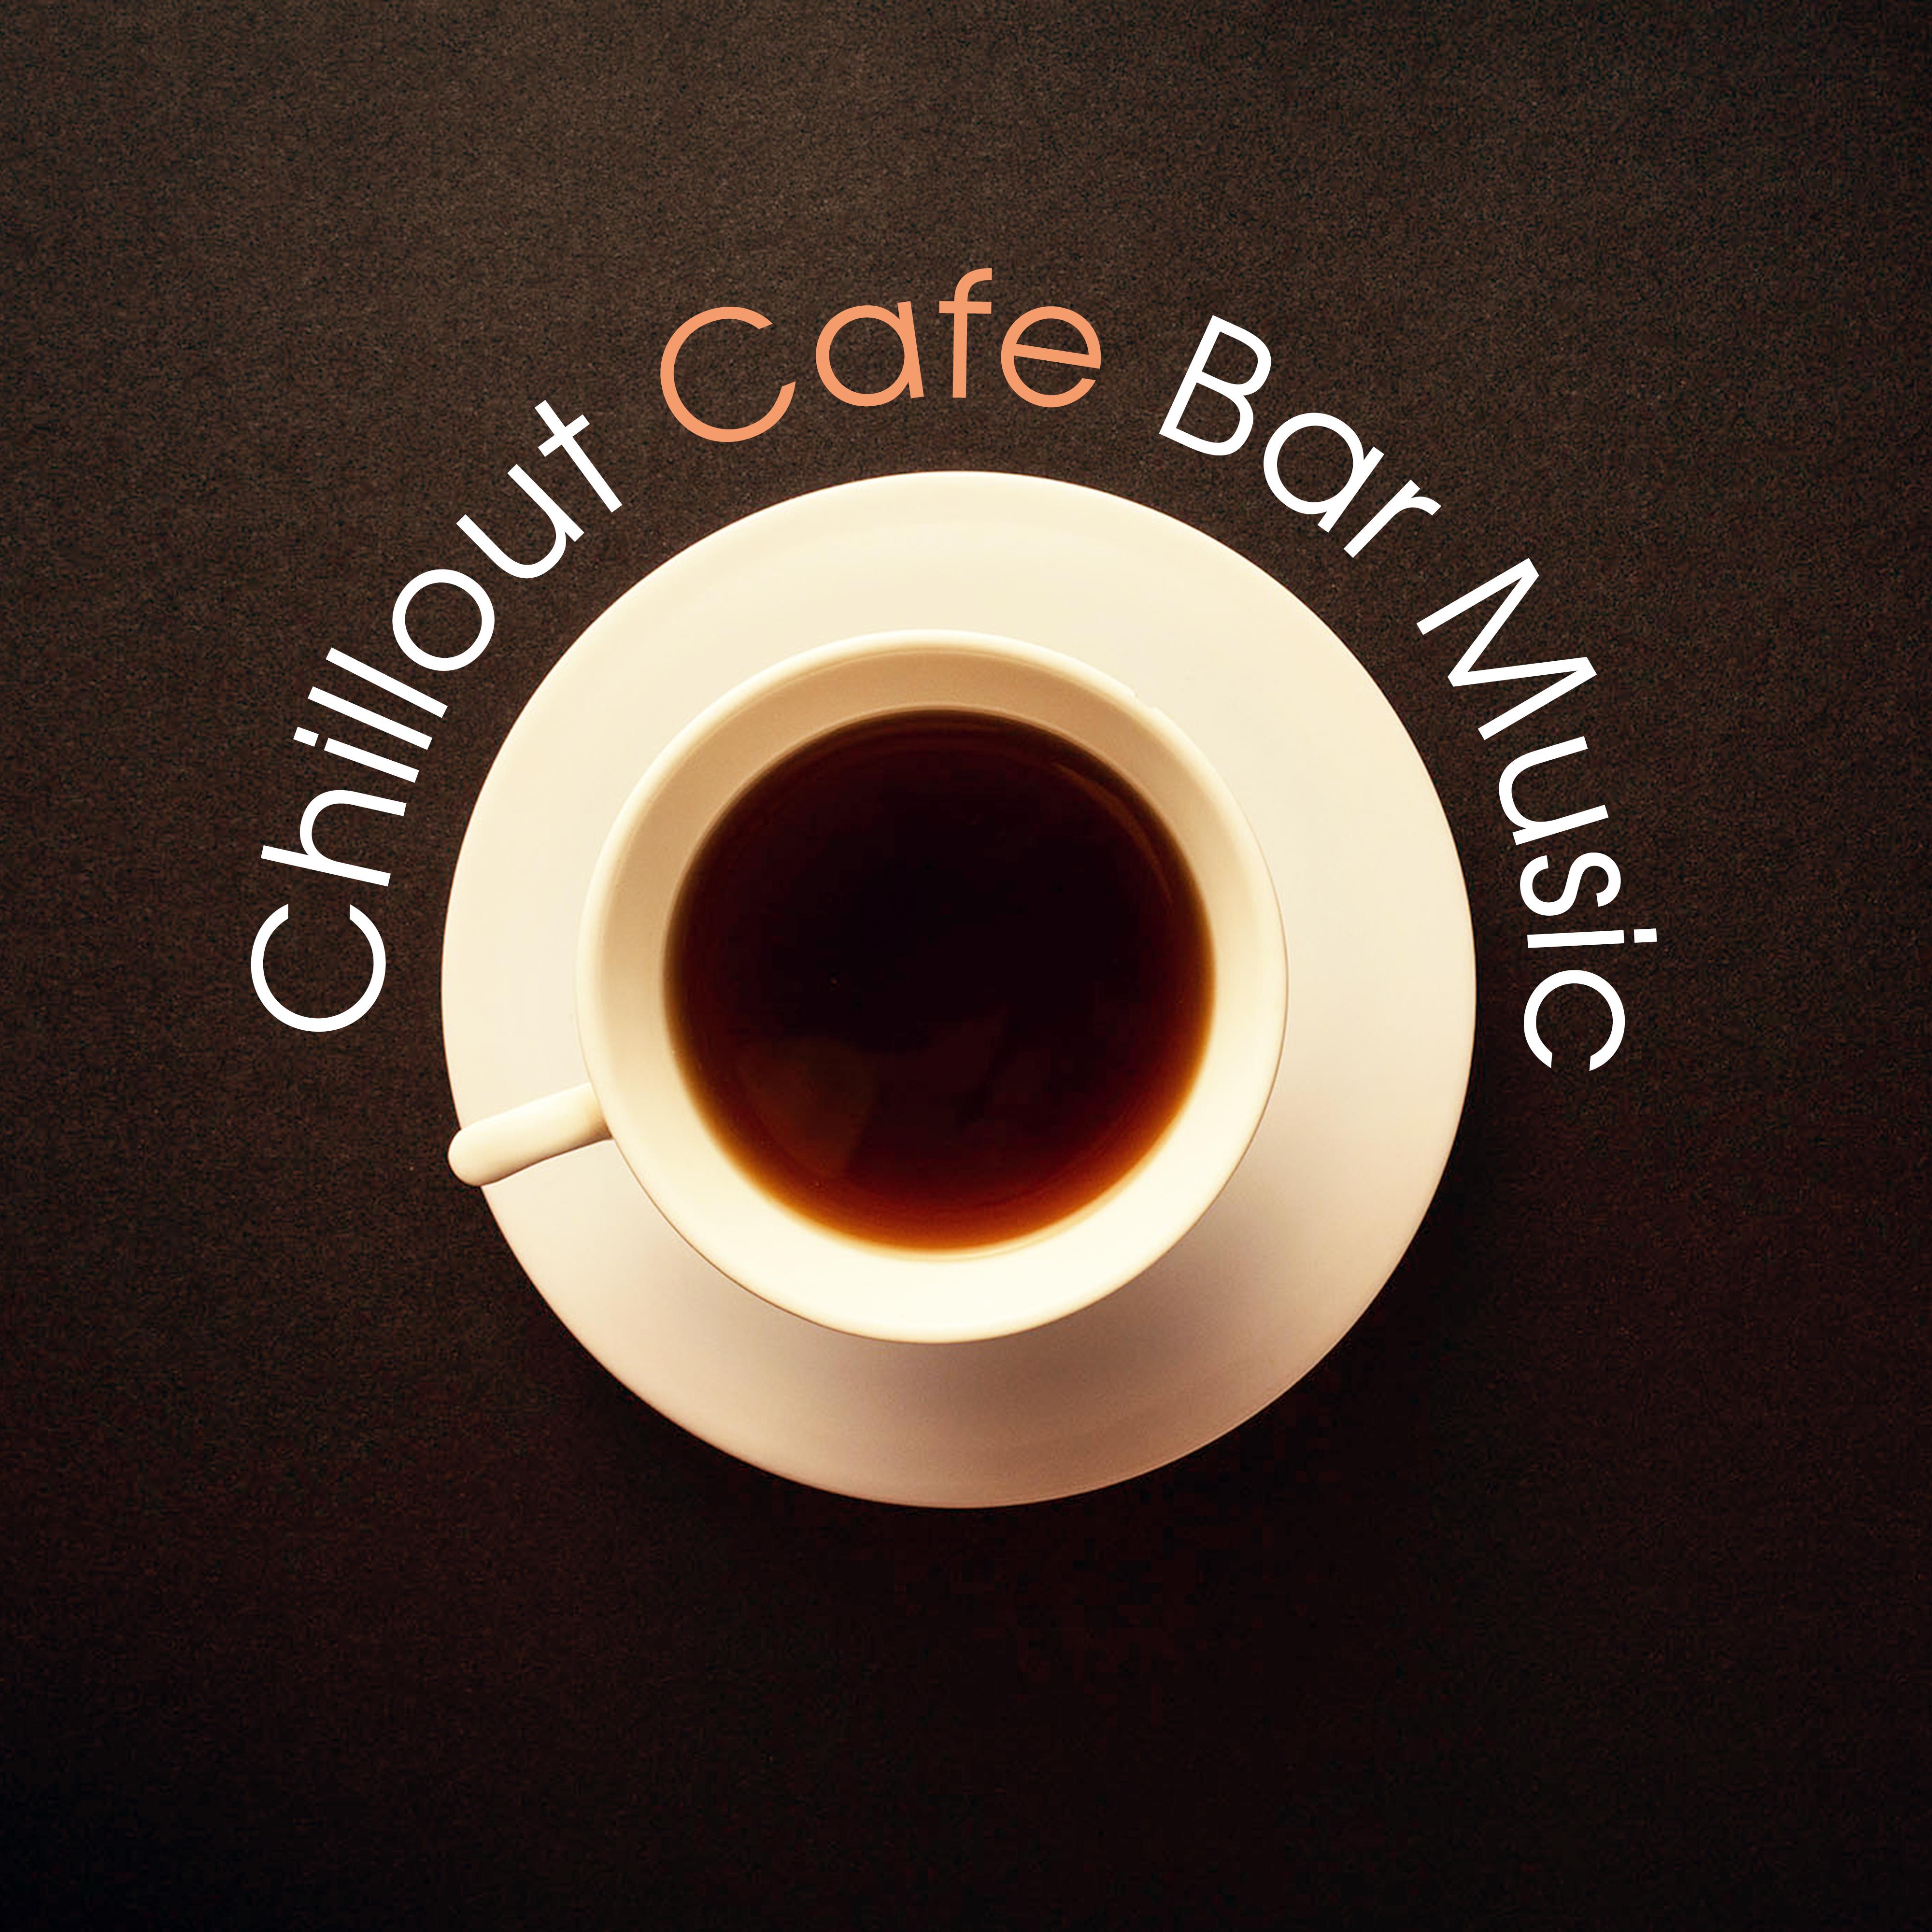 Chillout Cafe Bar Music  Summer Chillout Music, Essential Music, Coffee Time, Lounge